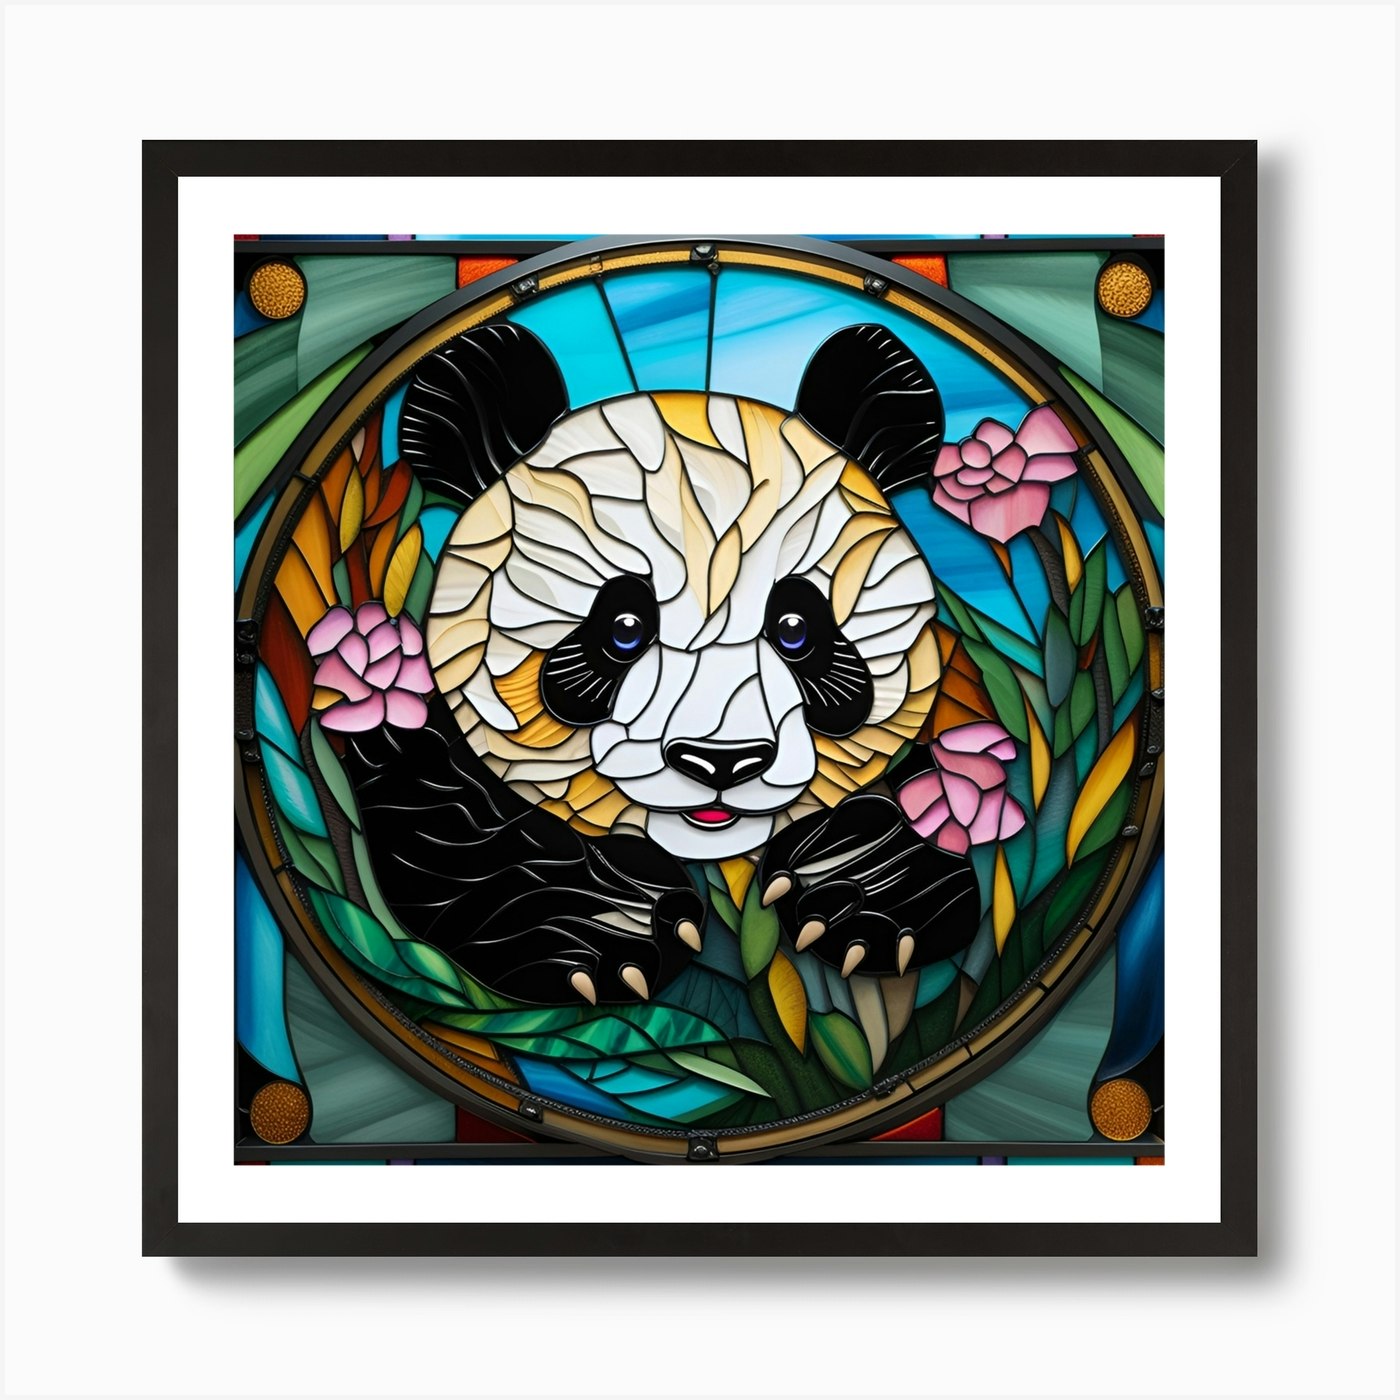 Panda Bear Stained Glass pop art Art Print by Magical Arts Realm - Fy